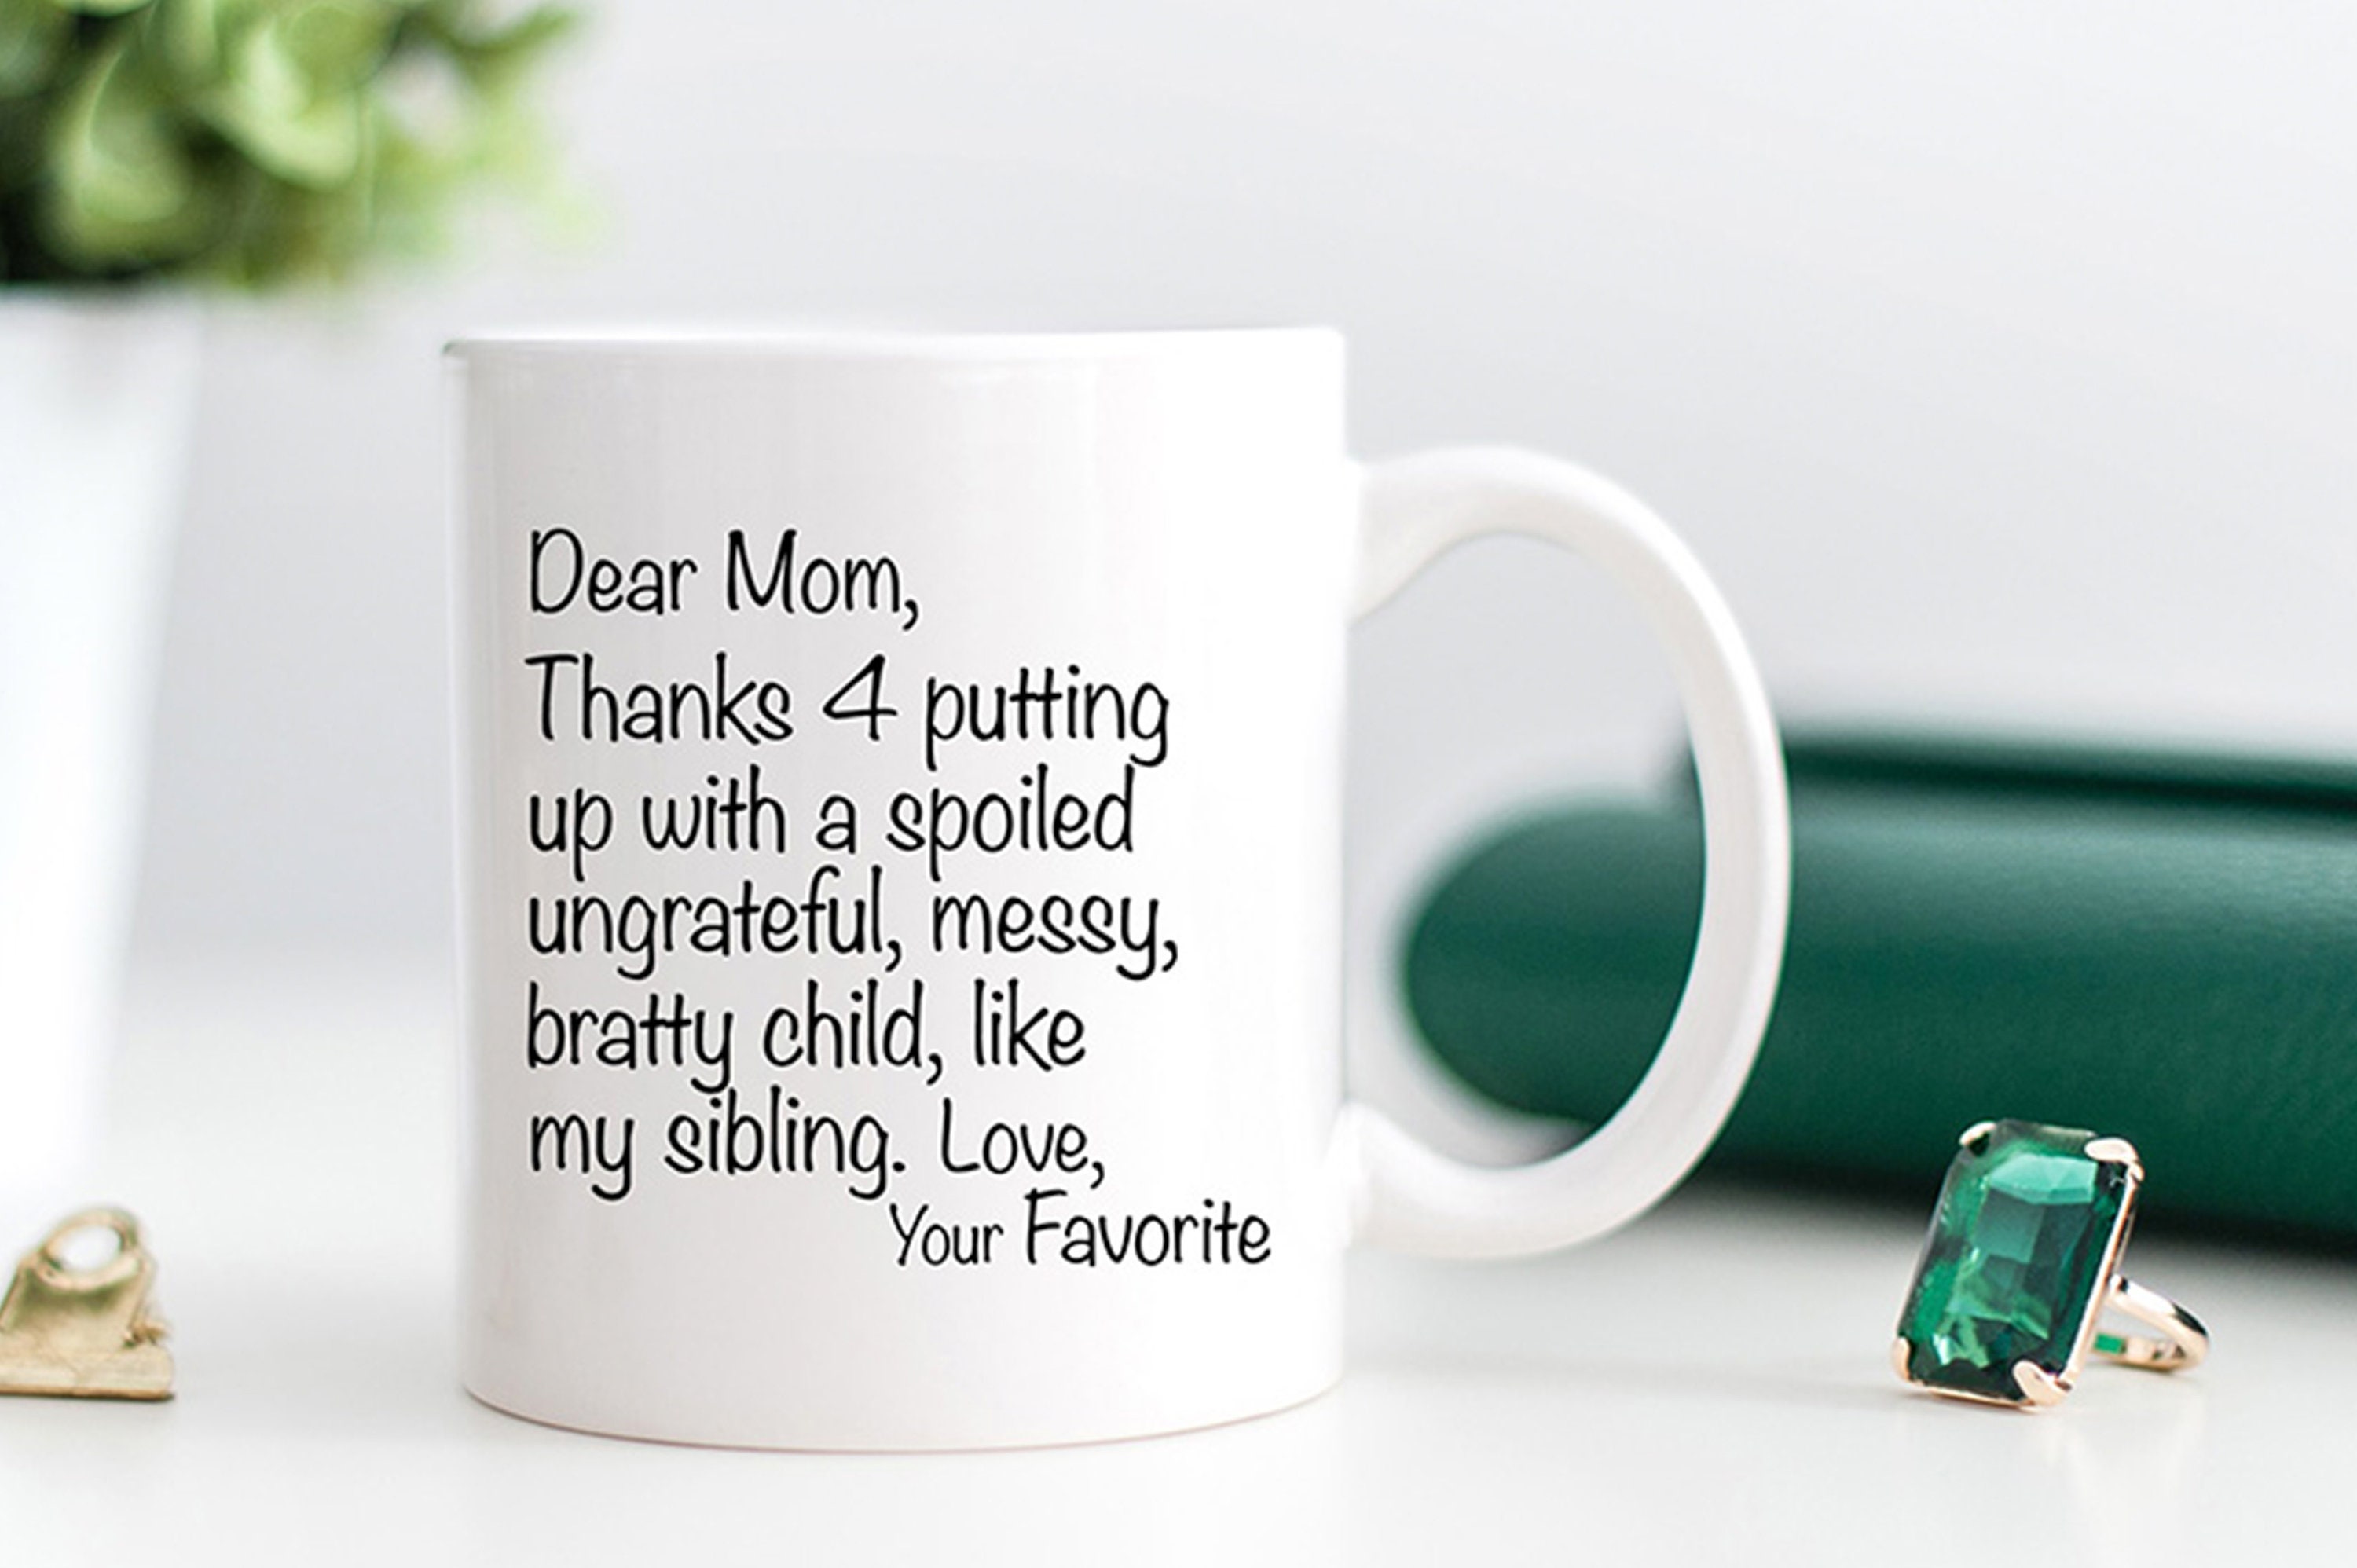 Mothers Day Gifts for Mom from Daug.hter Son, Dear Mom Mug, 11oz Novelty Funny Coffee Mugs, Christmas Birthday Presents Idea